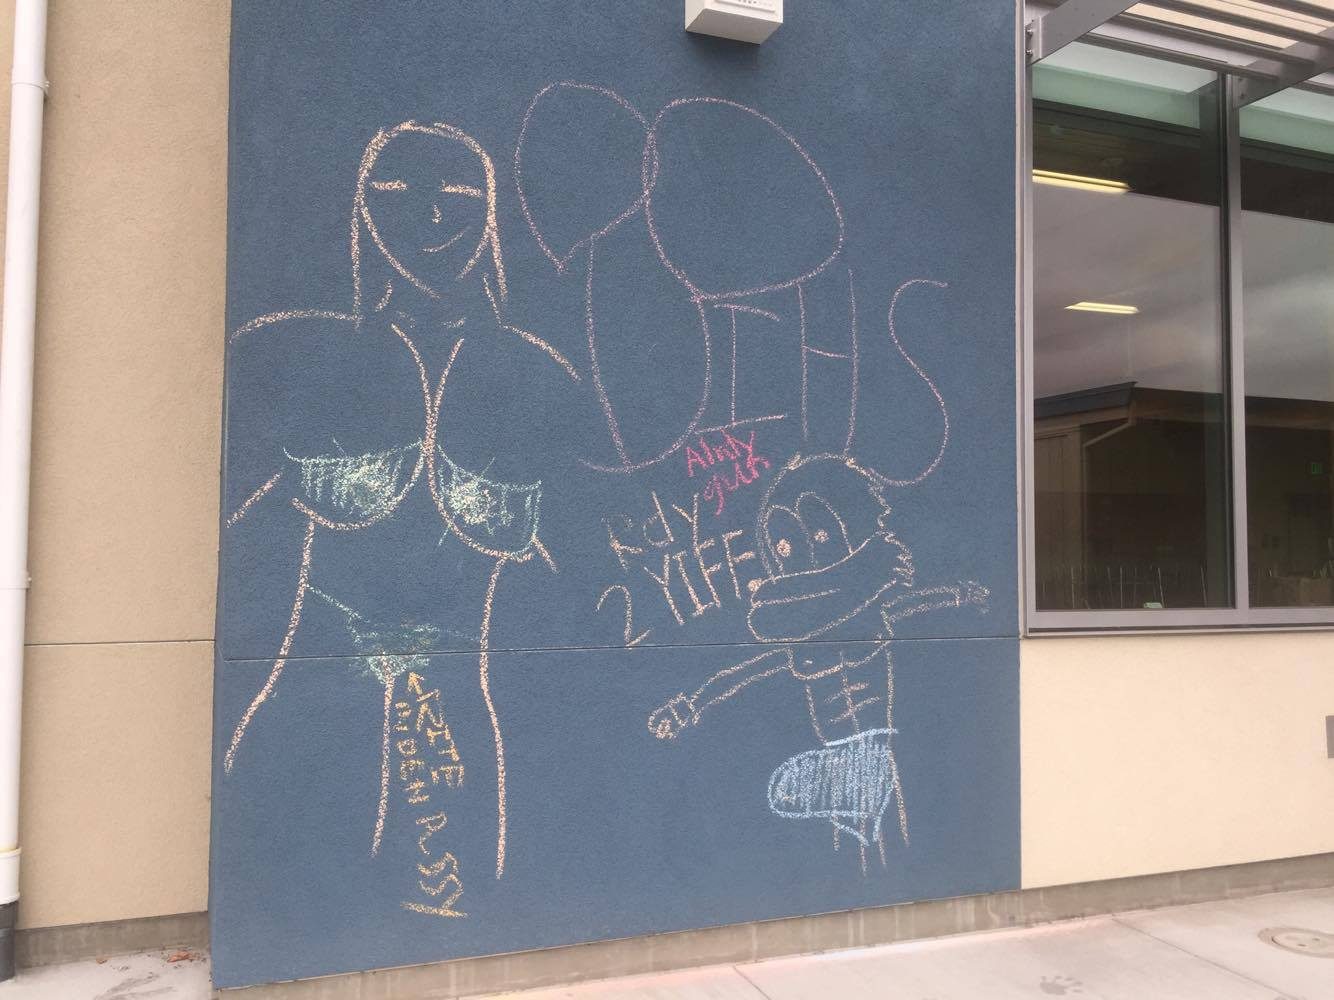 A drawing on the new building.